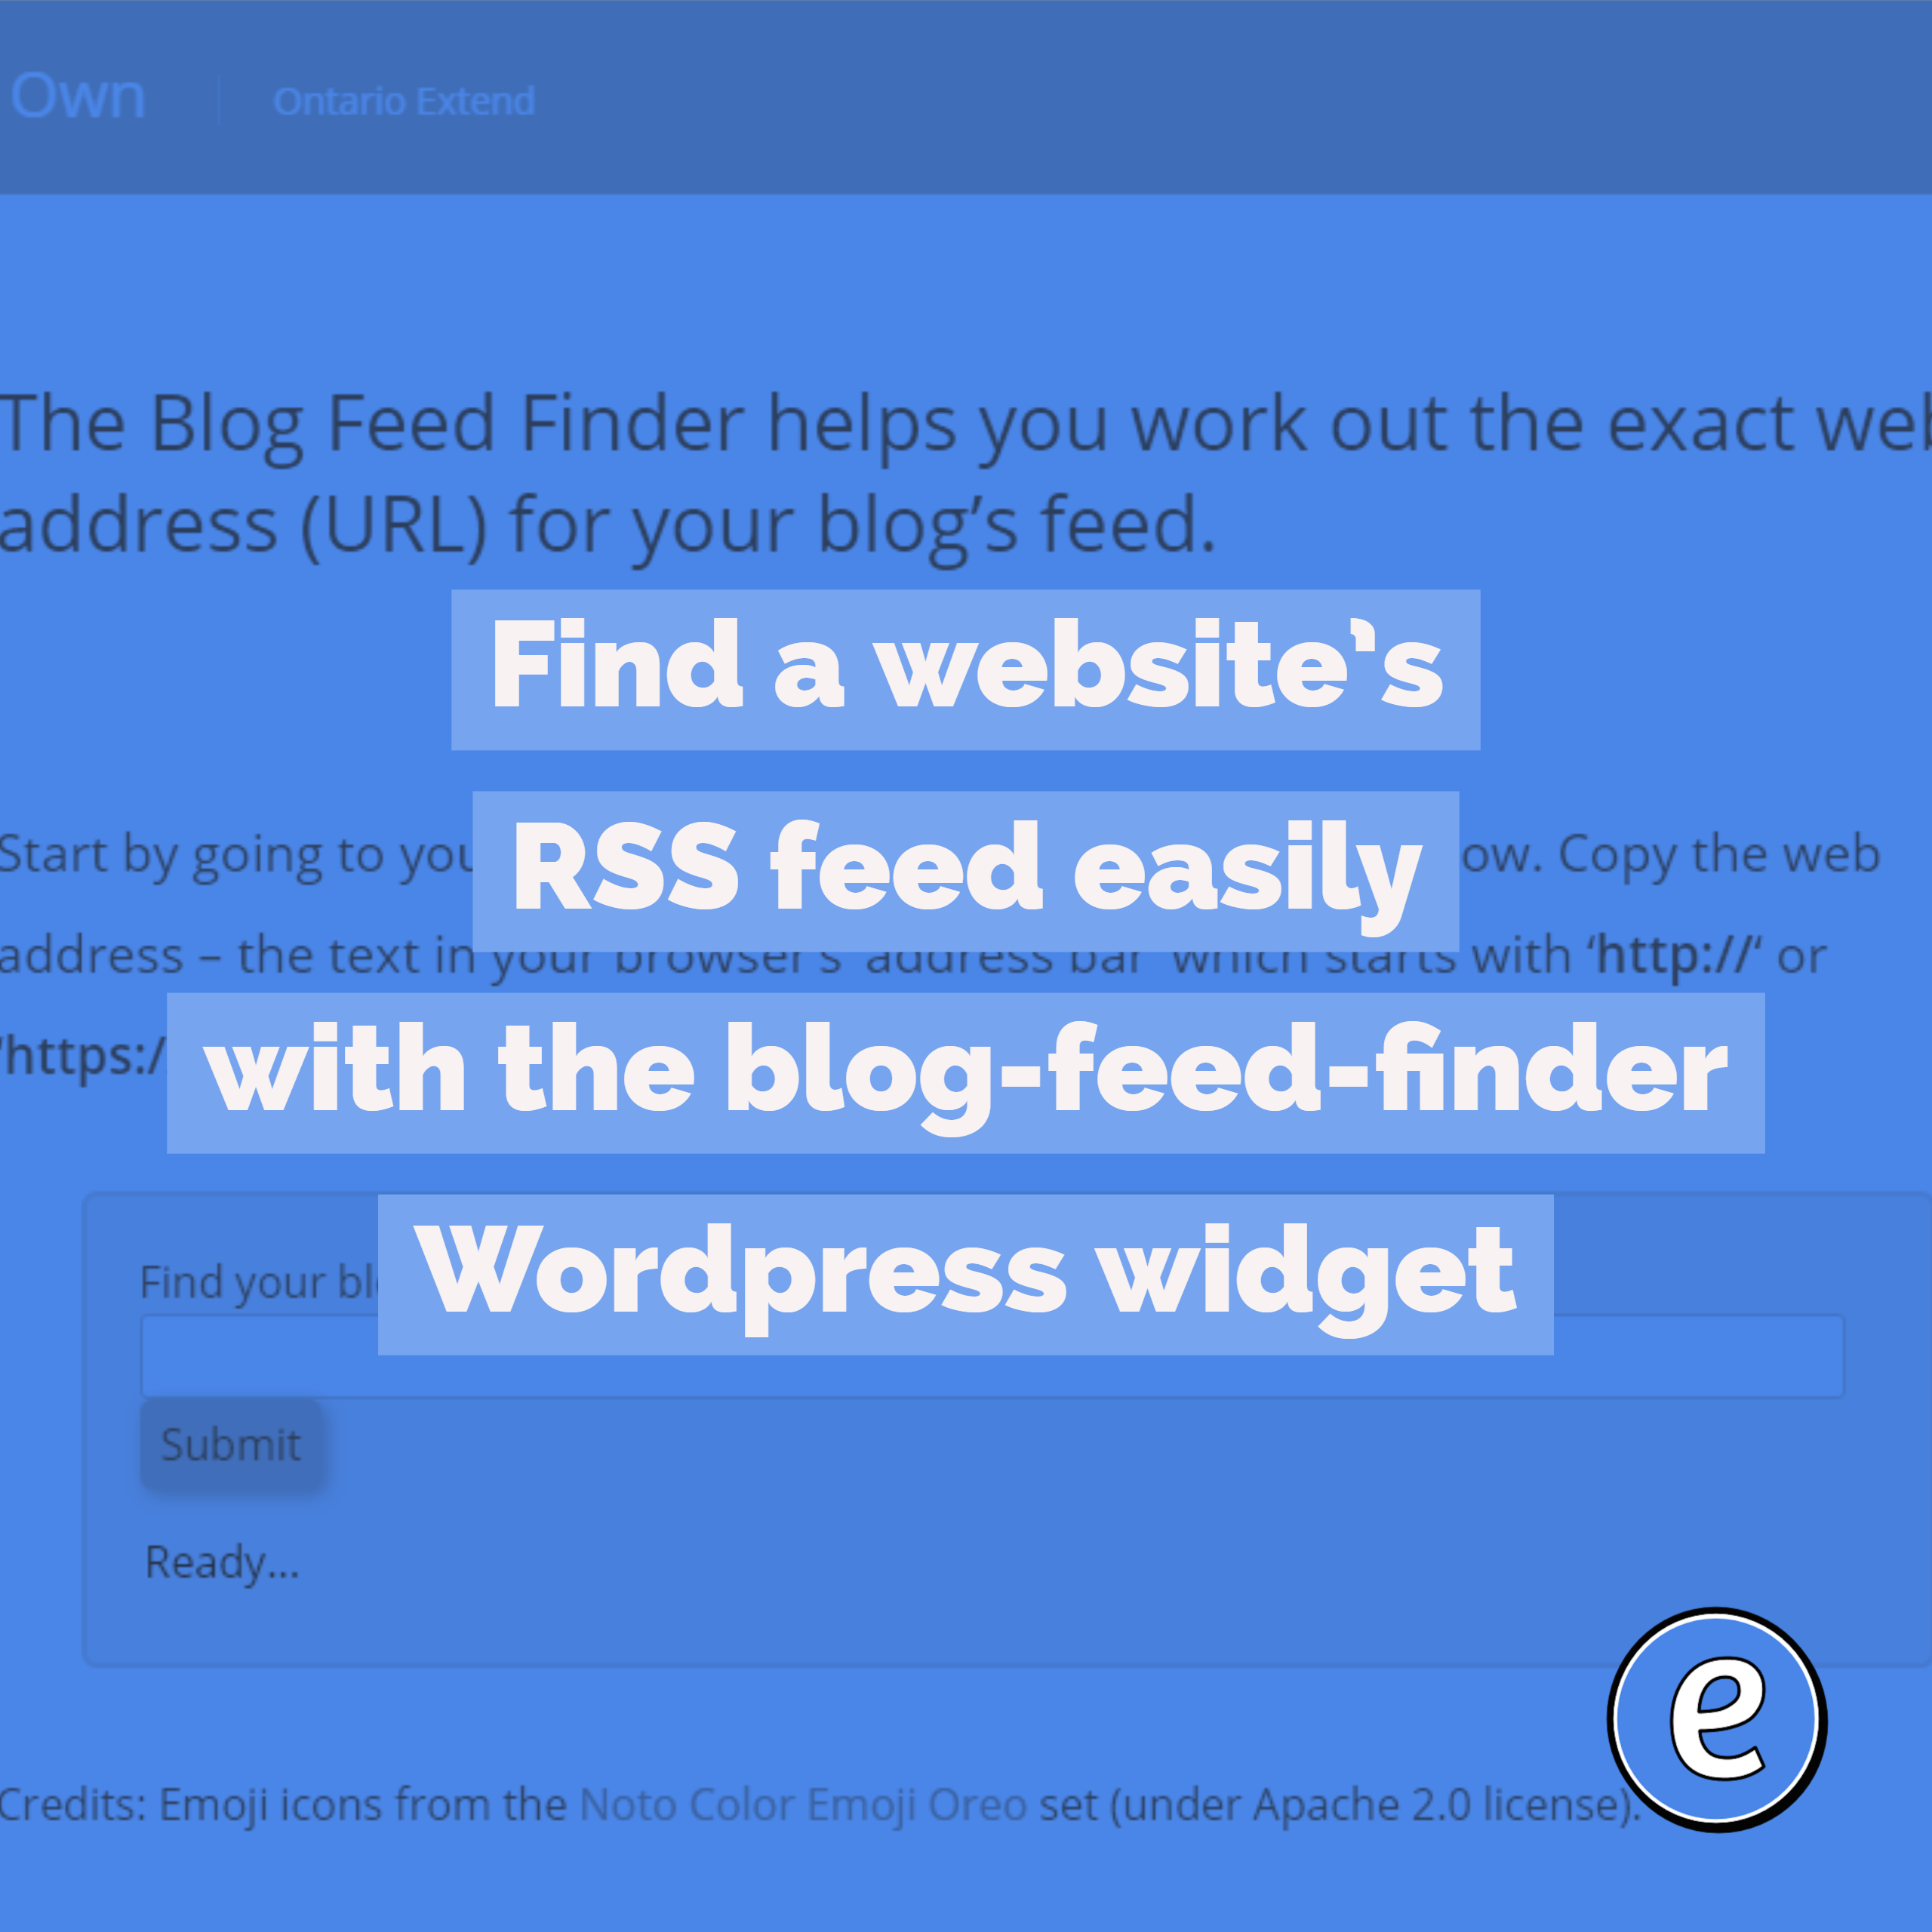 Find a website’s RSS feed easily with the blog-feed-finder WordPress widget